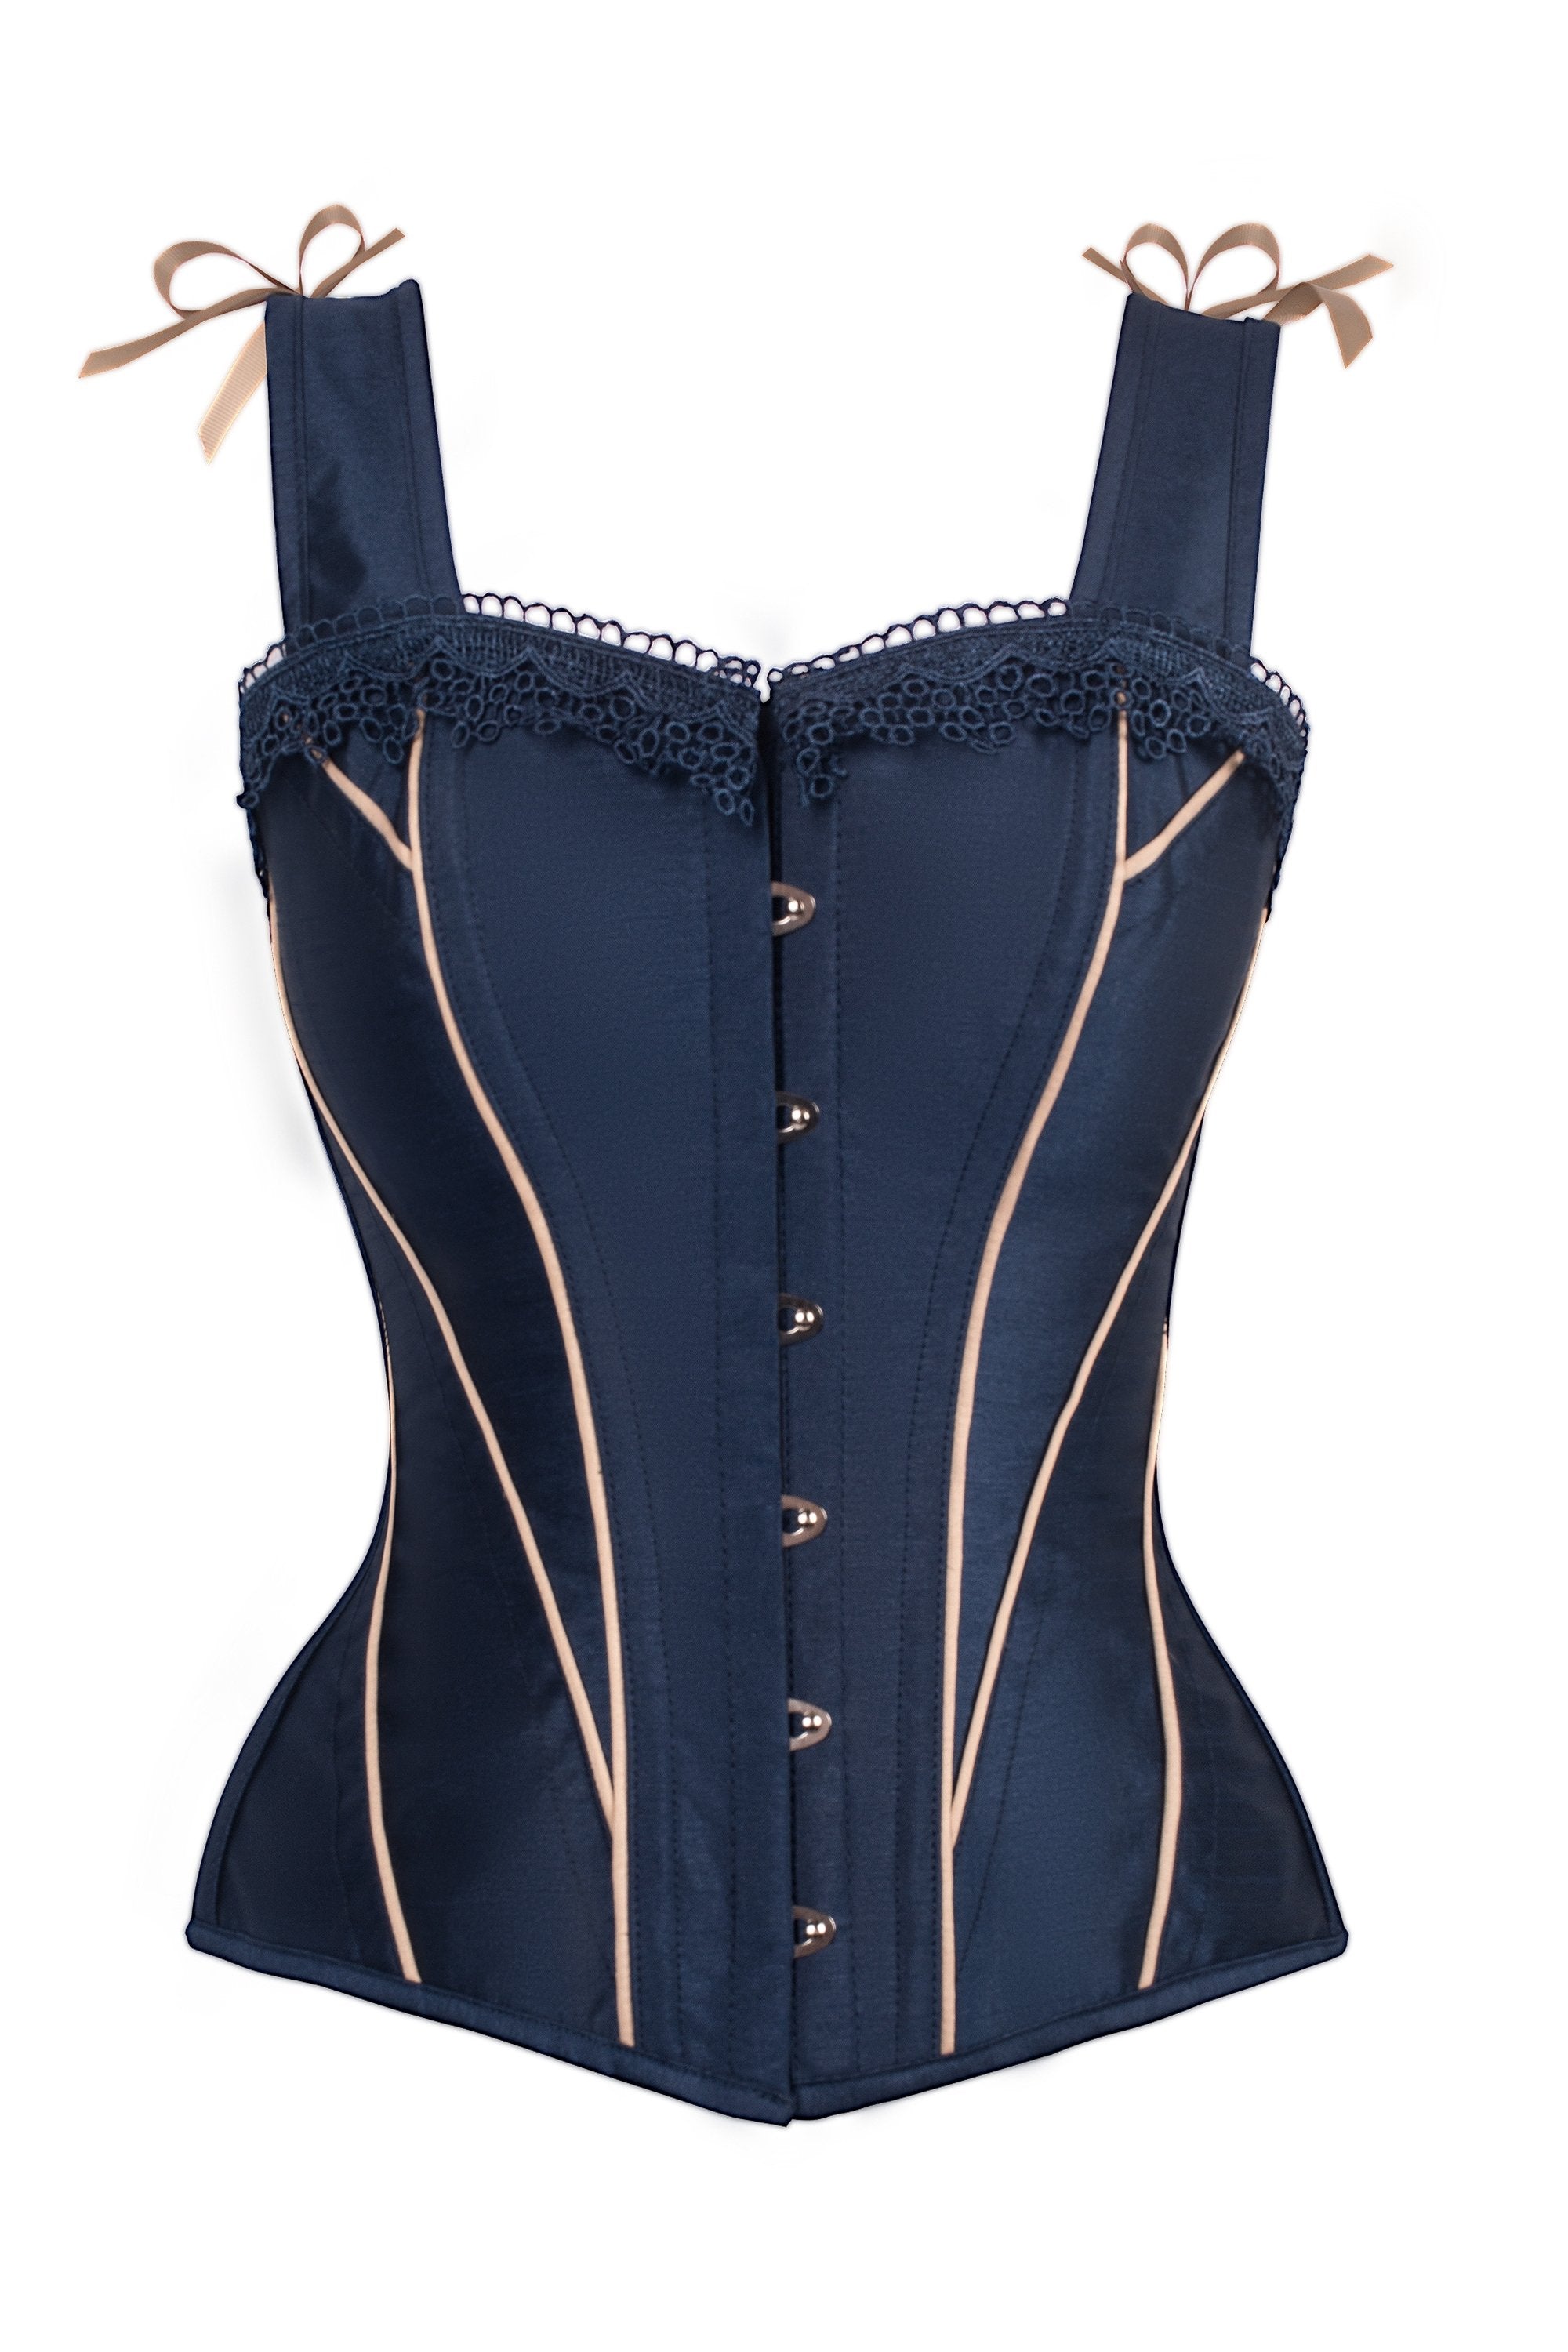 Daphne Blue Chambray Corset Top with Straps